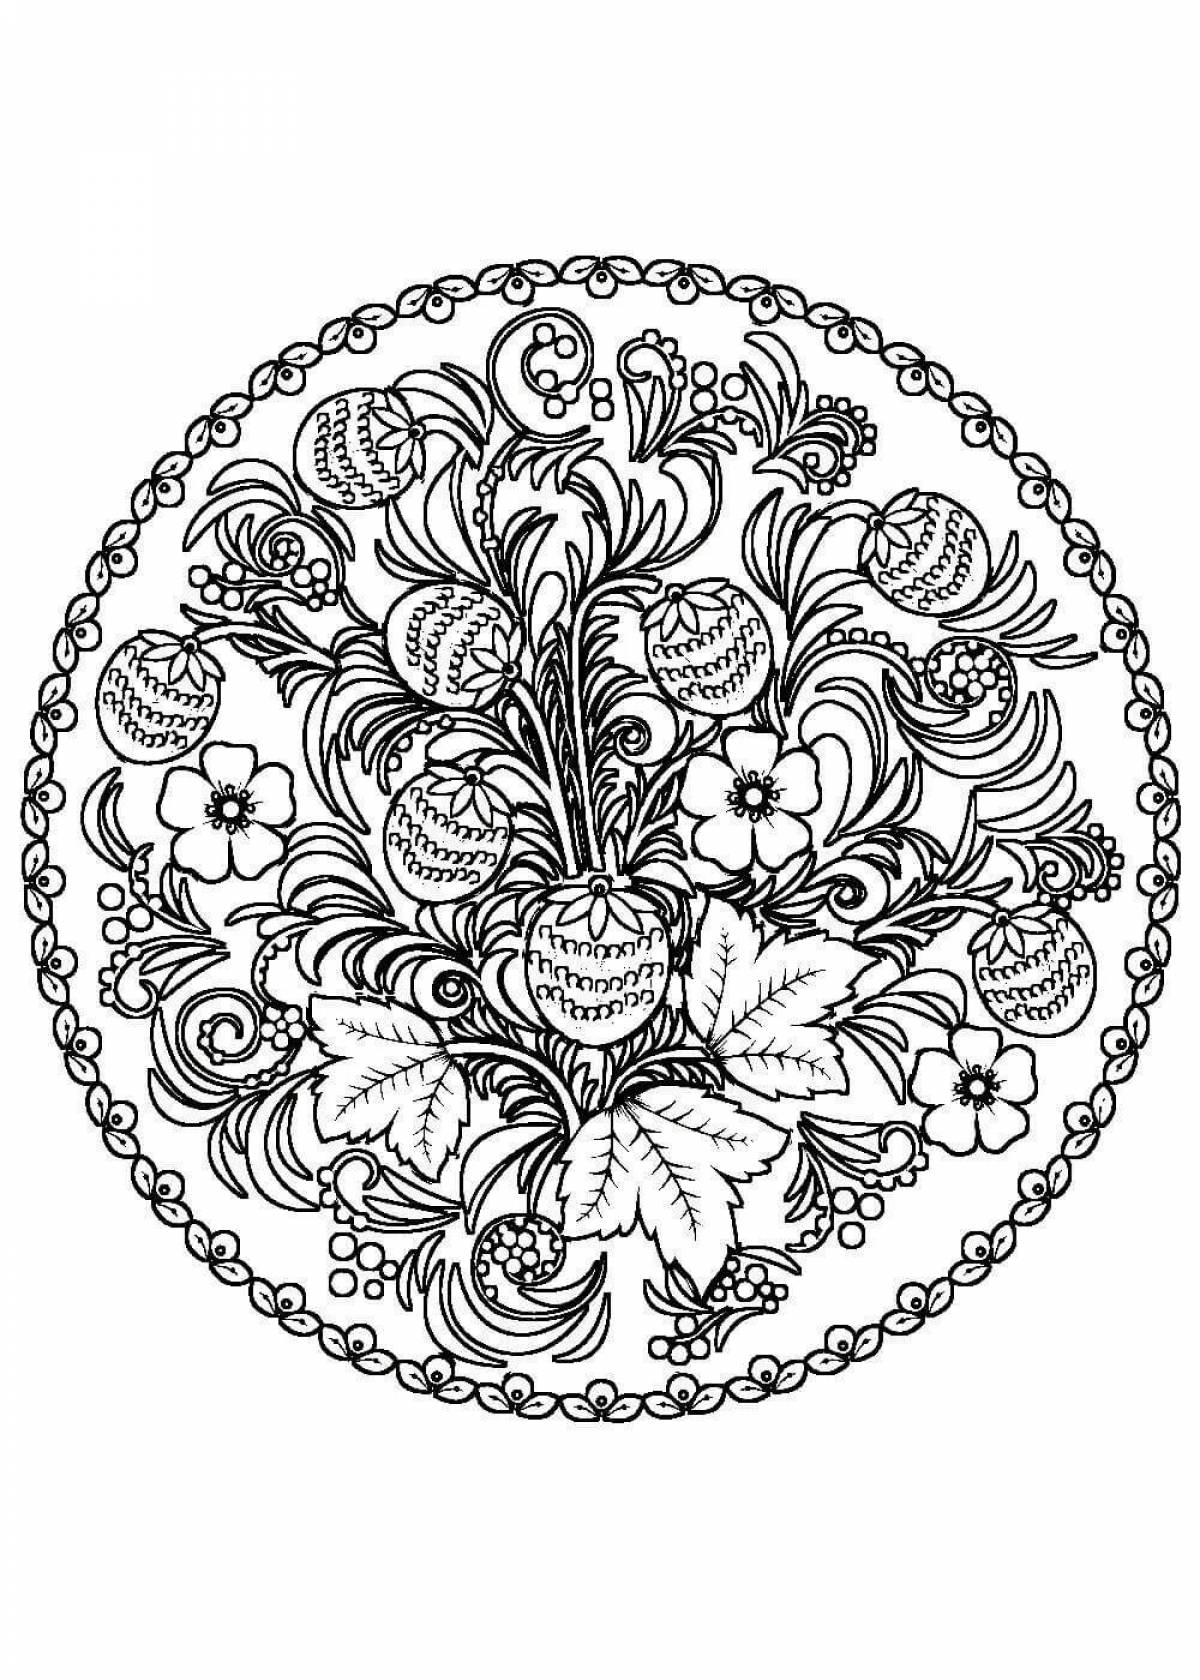 Spectacular coloring Khokhloma pattern in a circle